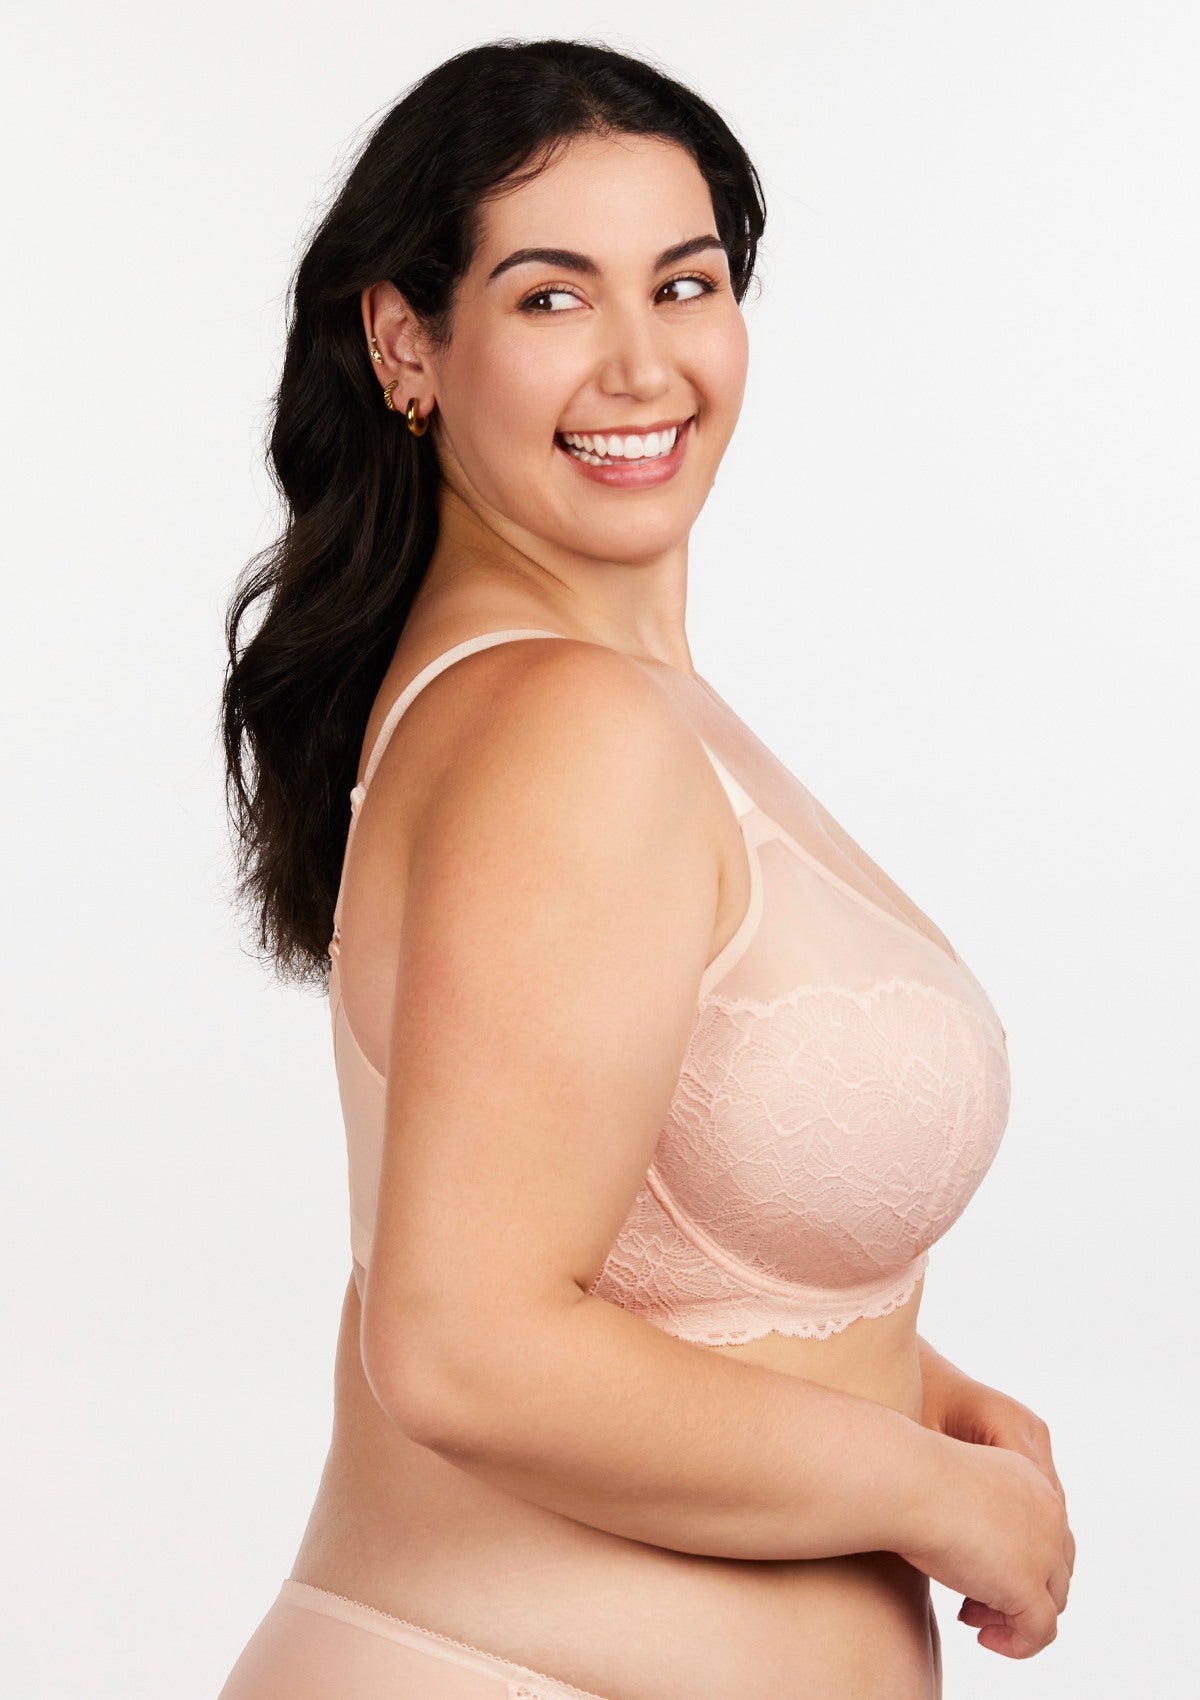 HSIA Blossom Sheer Lace Bra: Comfortable Underwire Bra For Big Busts - Dusty Peach / 46 / D